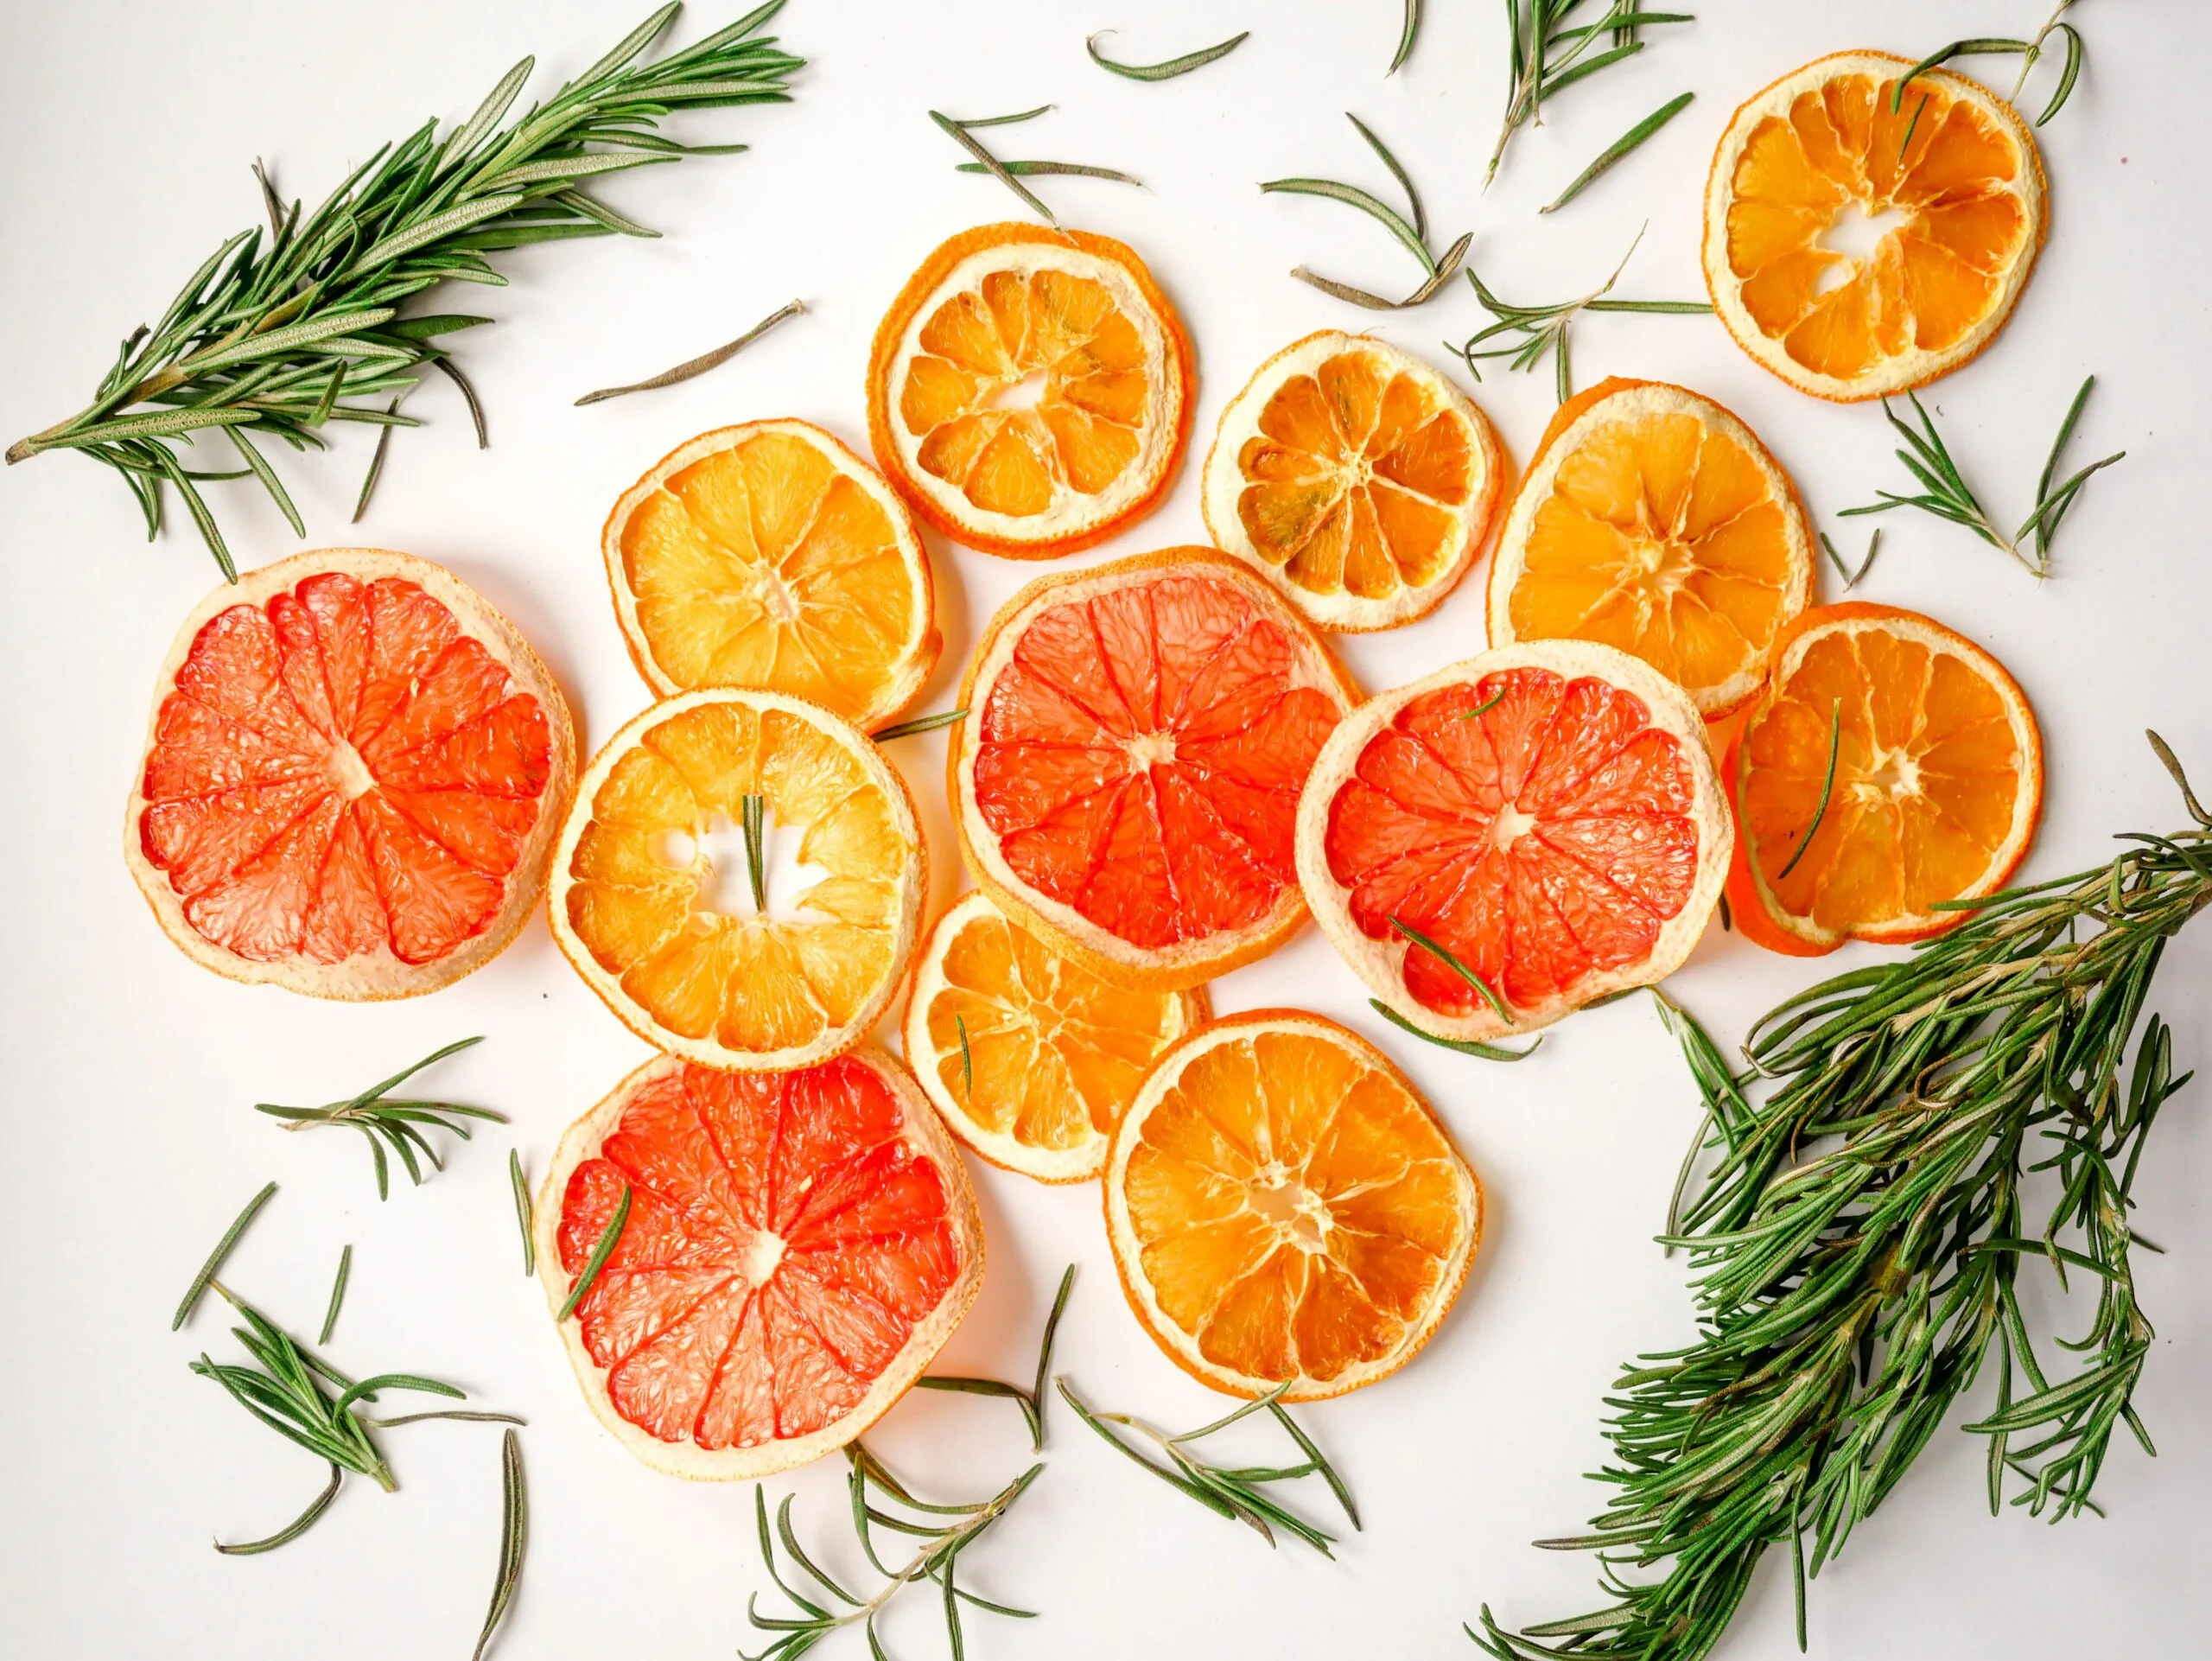 Brightly colored citrus fruit with rosemary